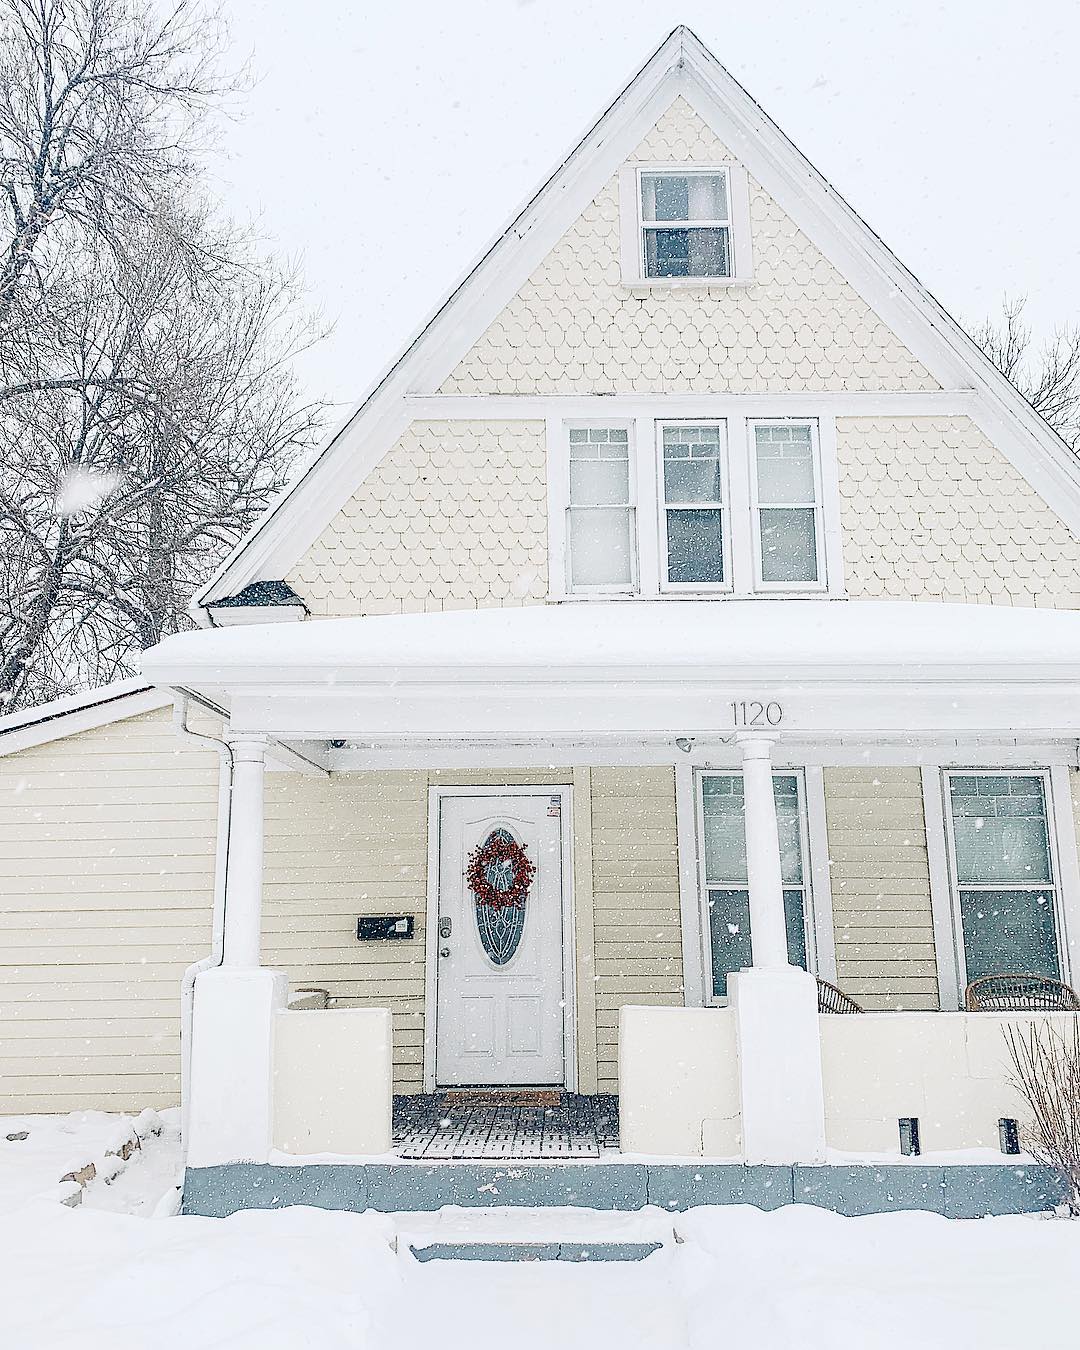 yellow bungalow style home in old colorado city with snow on the ground photo by Instagram user @brookemikulas